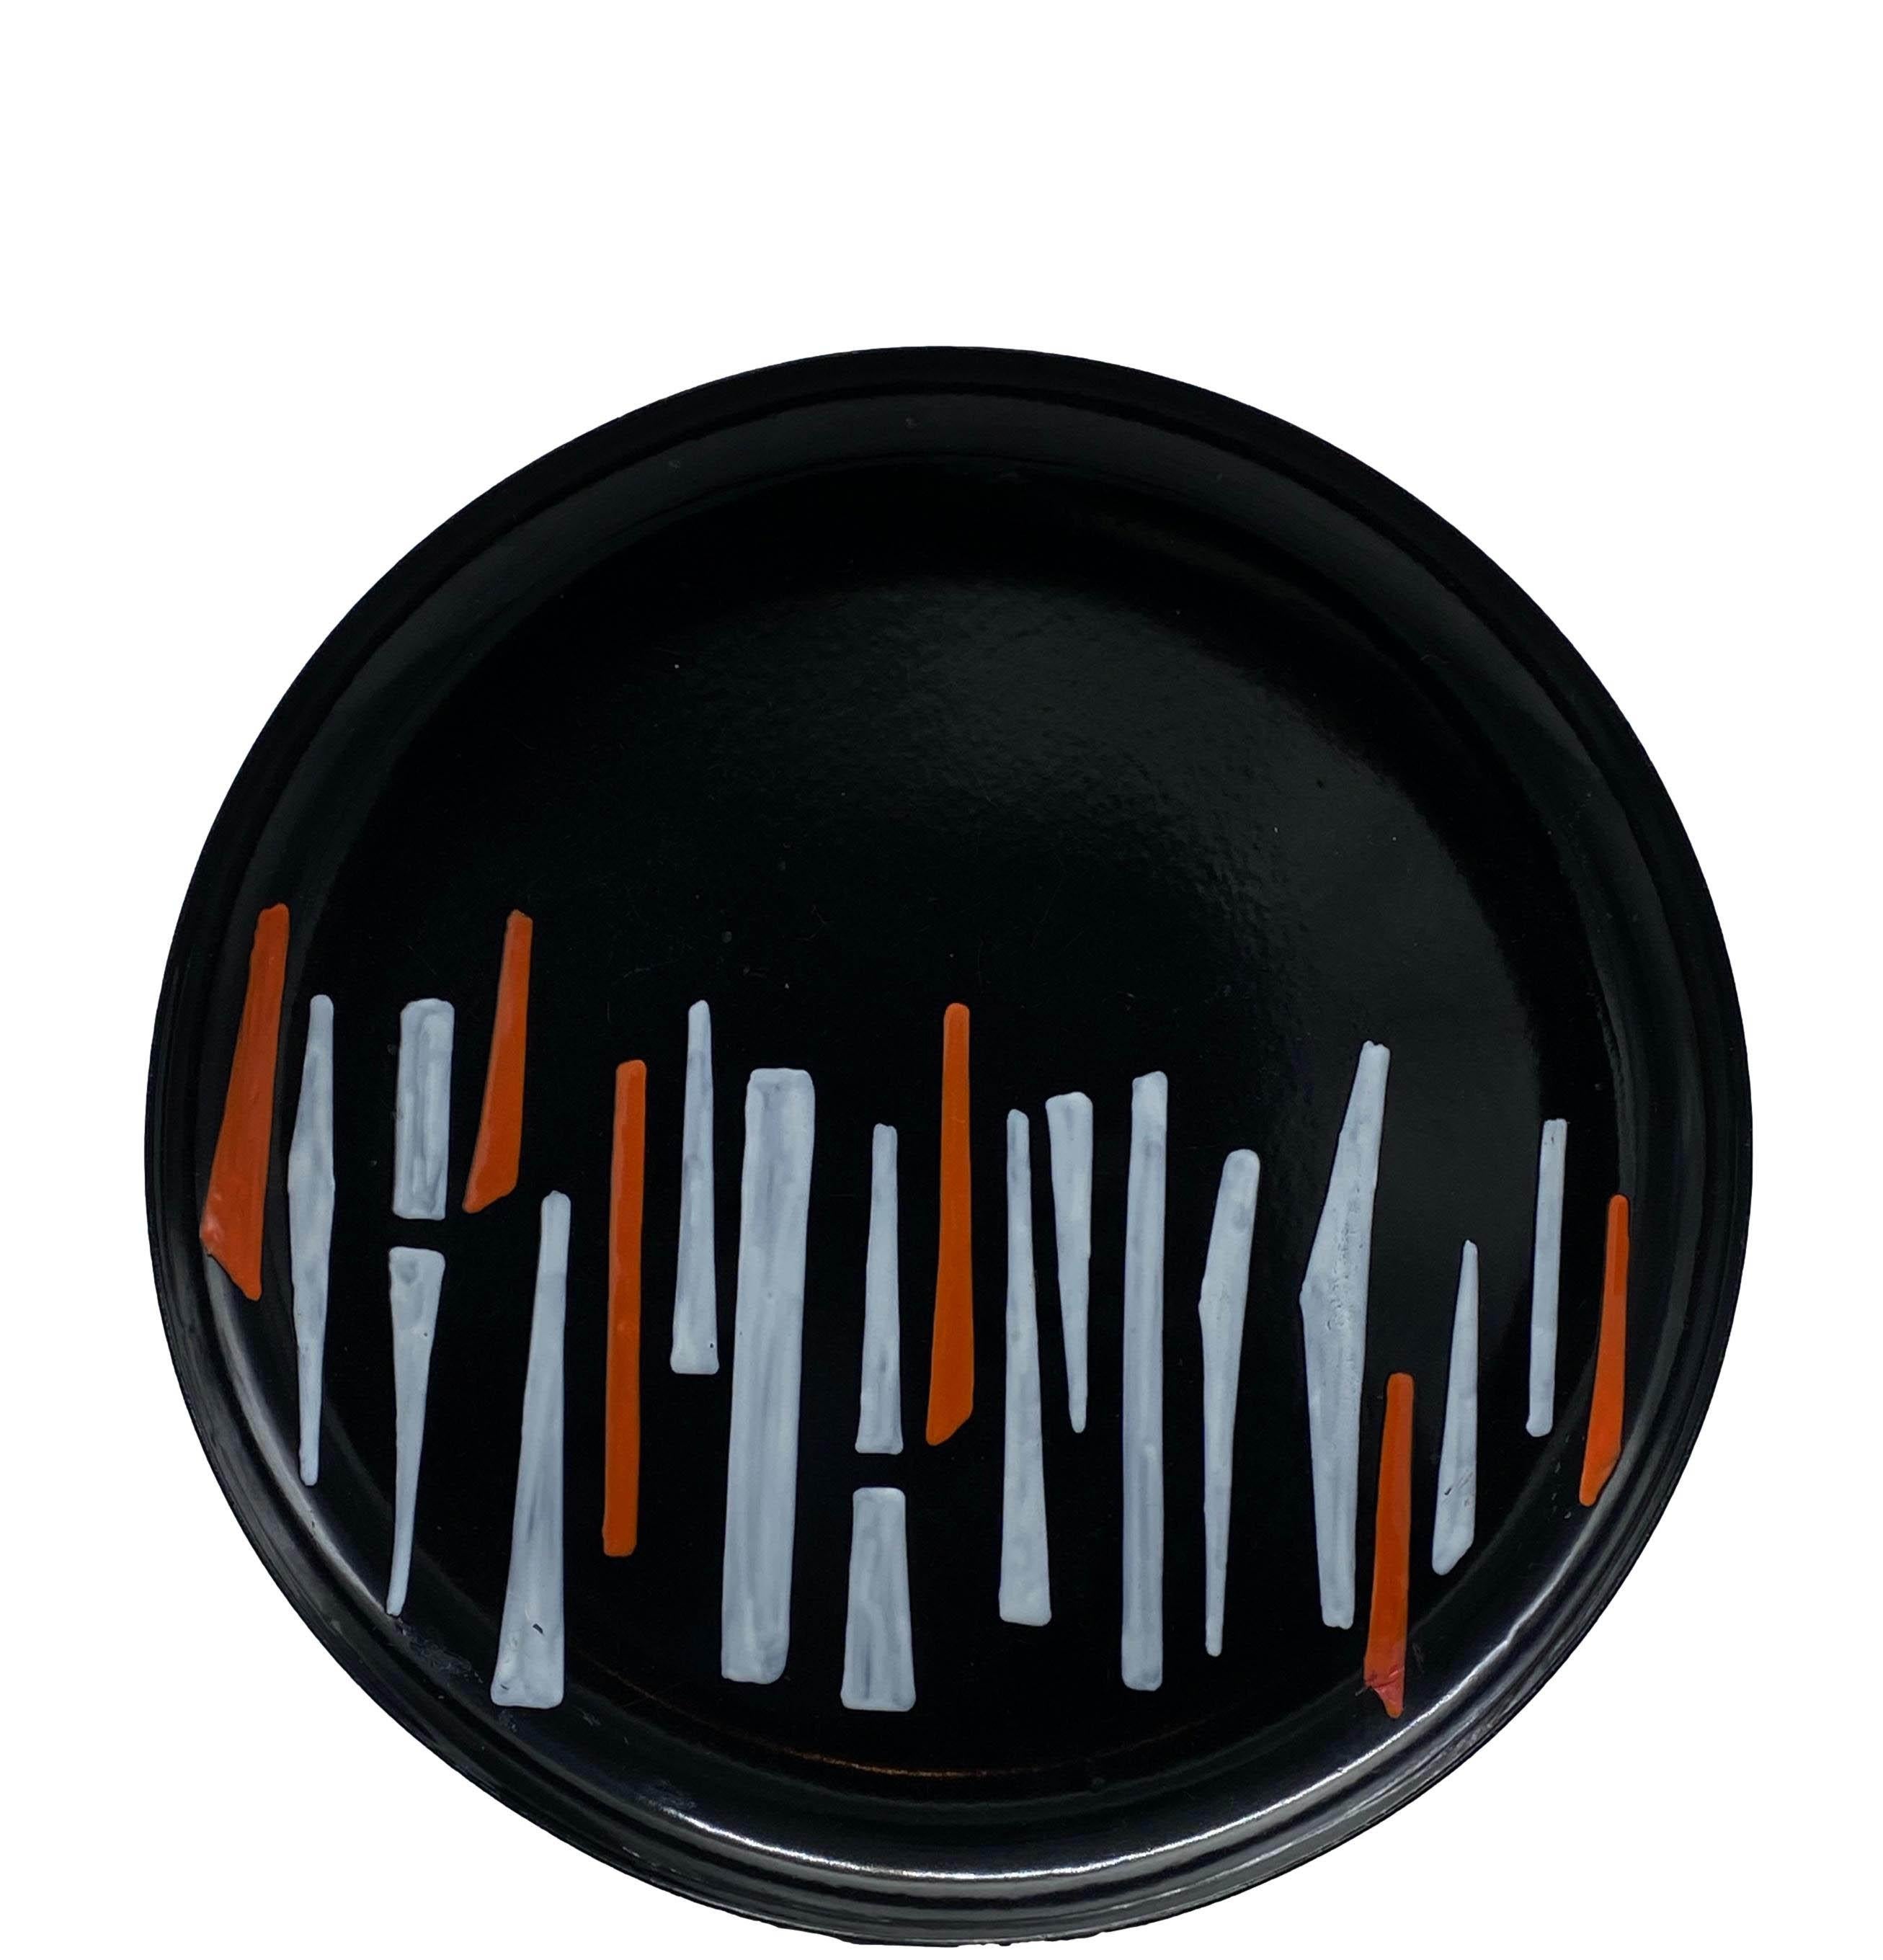 A large and beautiful 1950s circular art plate of Italian design by Silvia Poggi Bonzi. Abstract enamel decoration on black, orange and white metal. Curved edge. This bowl can be used as a tidy tray or centrepiece.